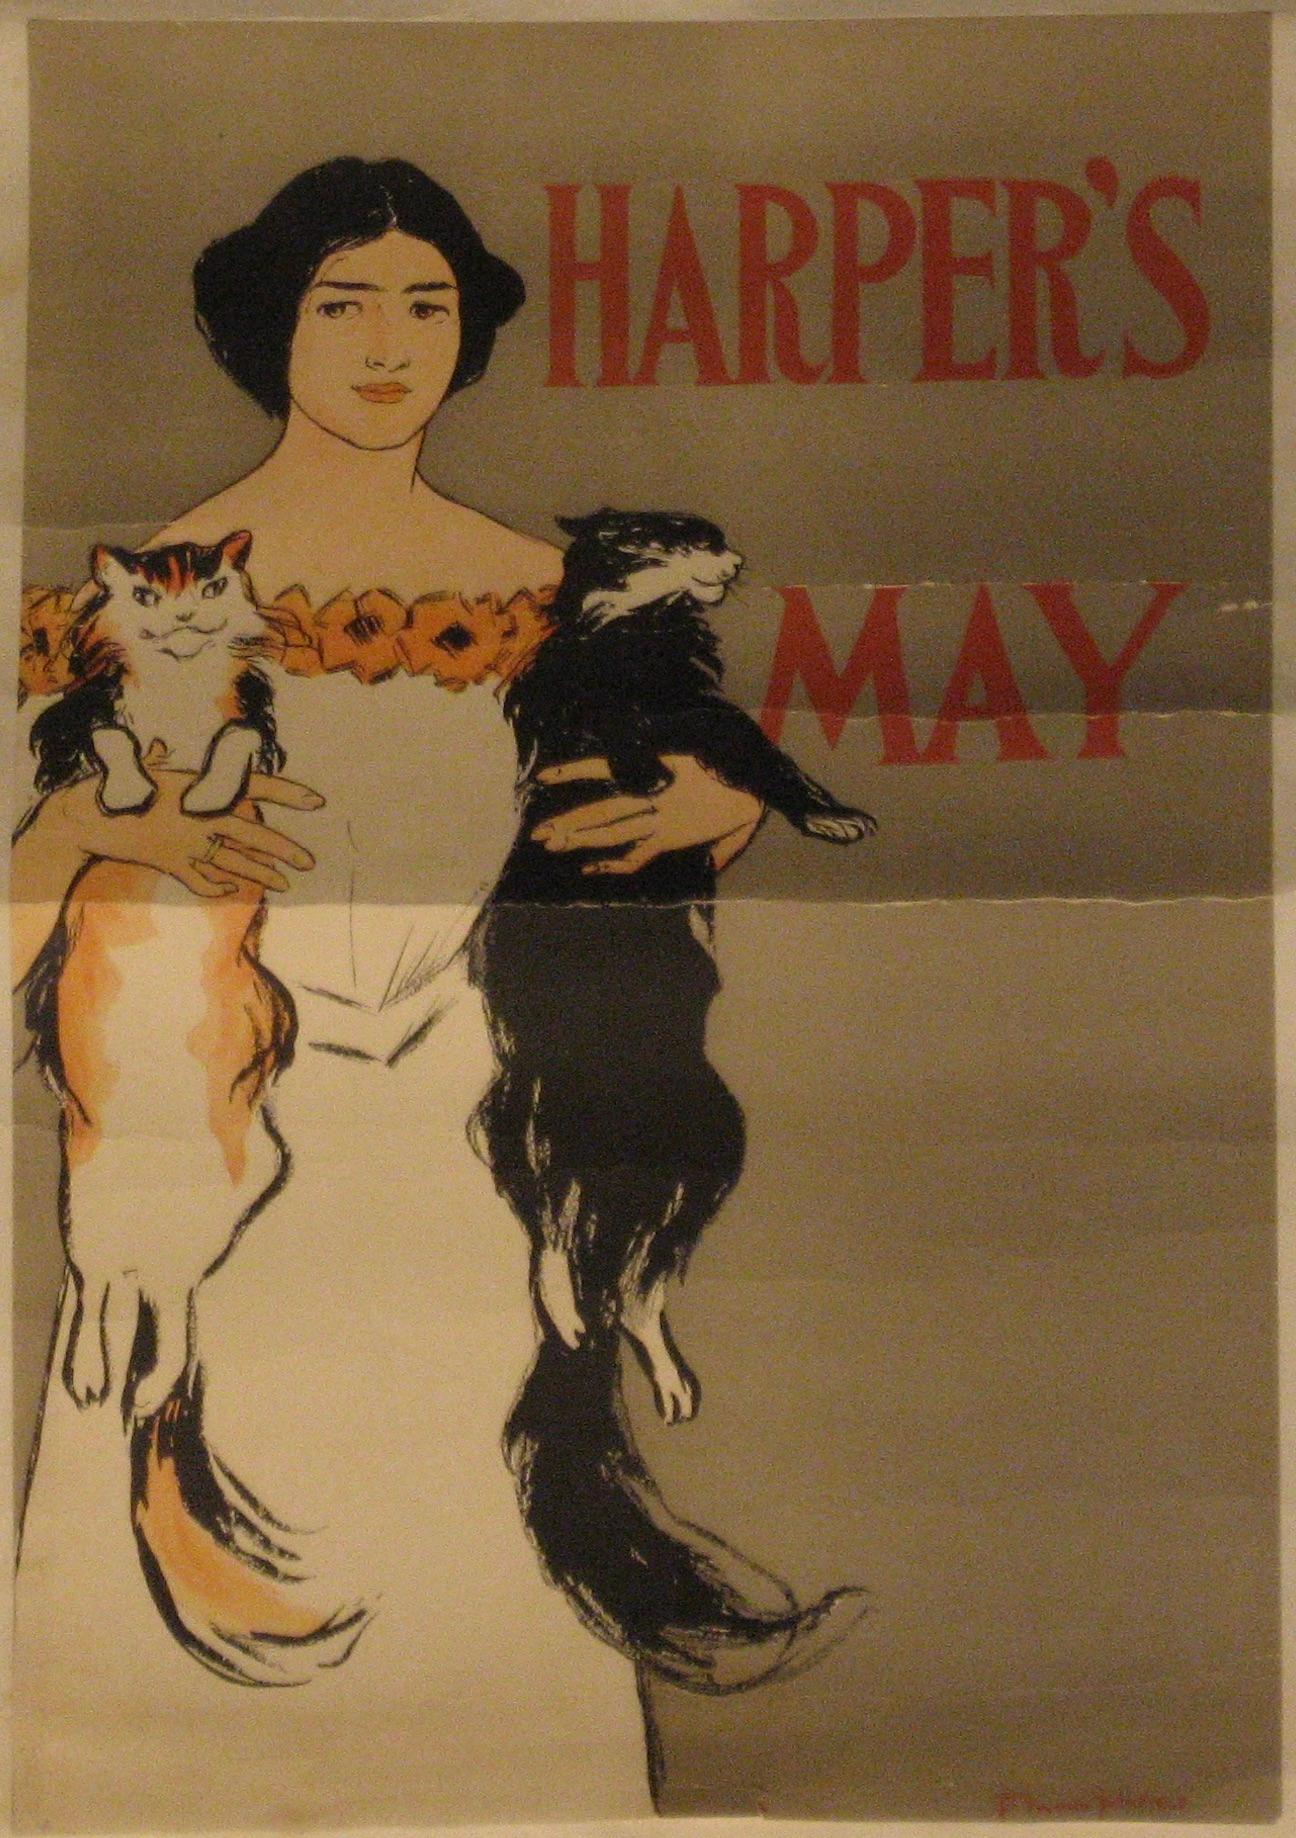 20th Century Harper’s May For Sale